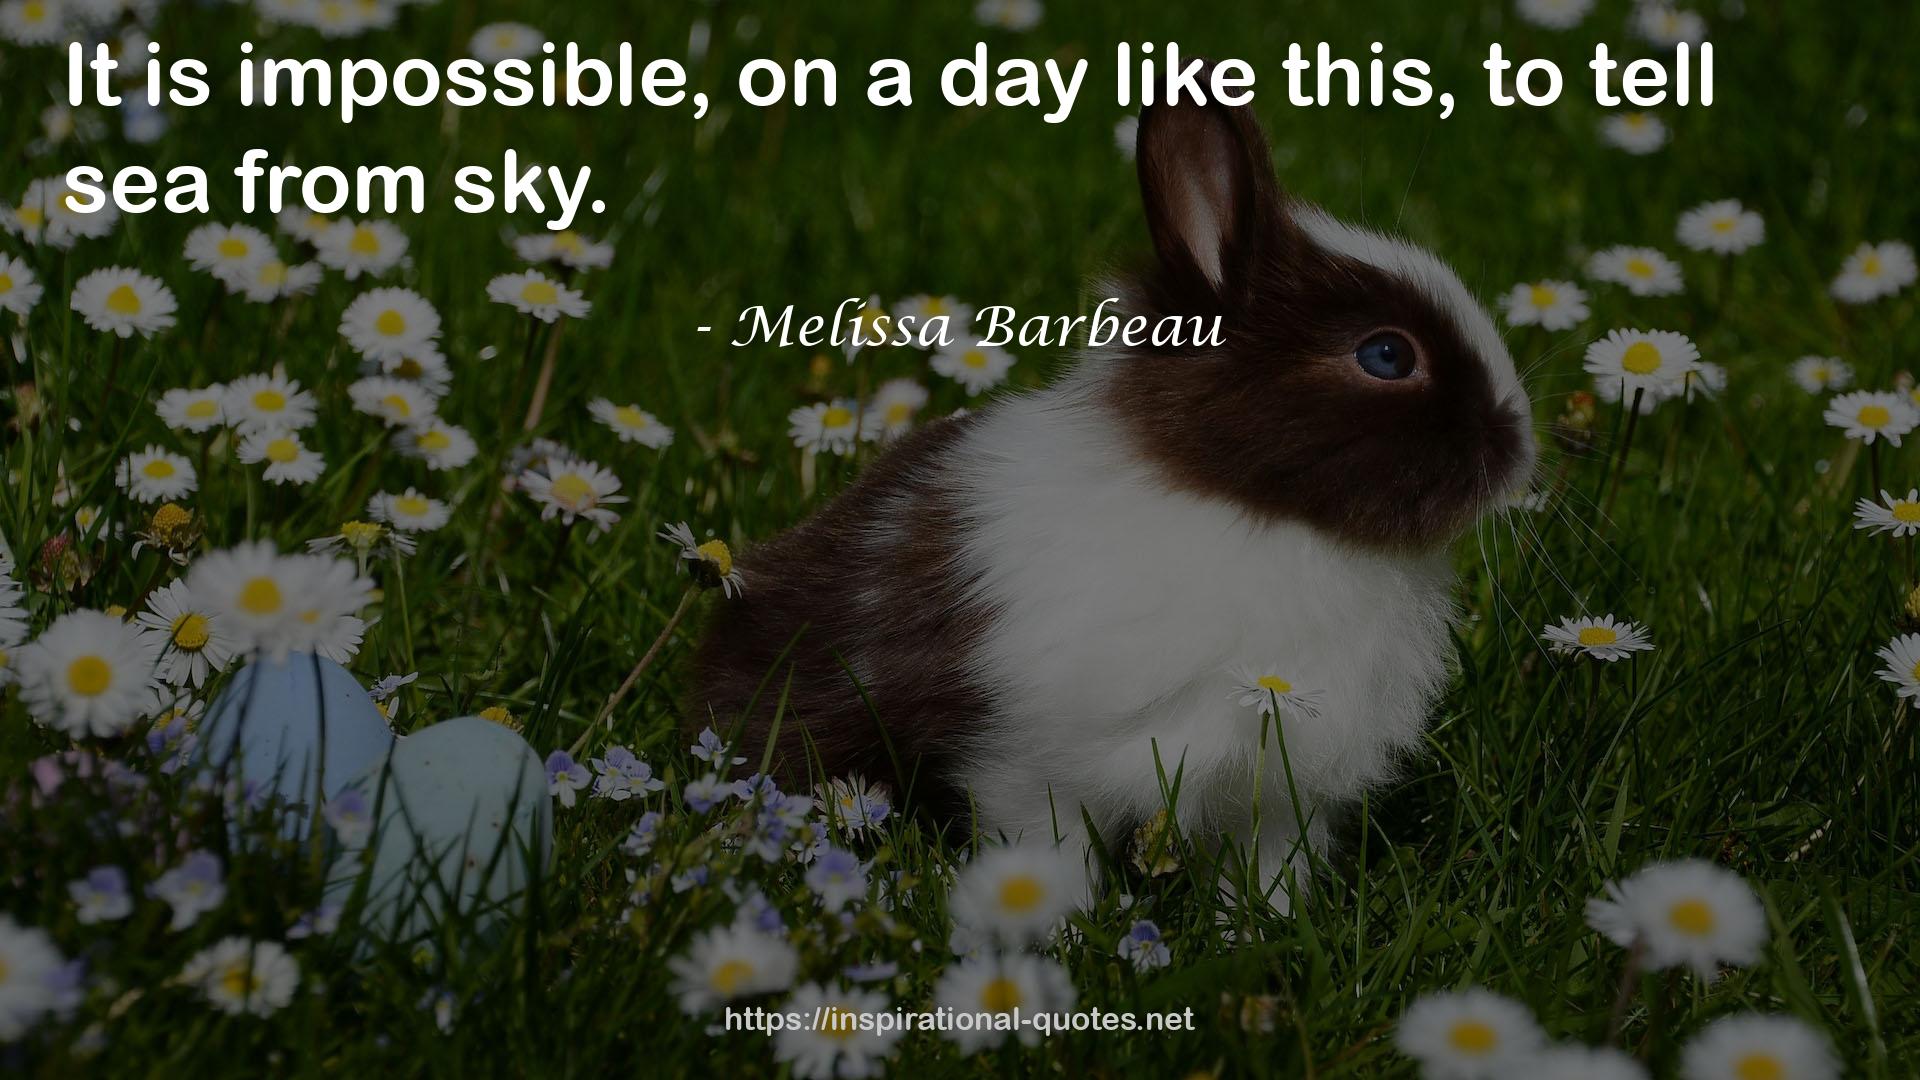 Melissa Barbeau QUOTES